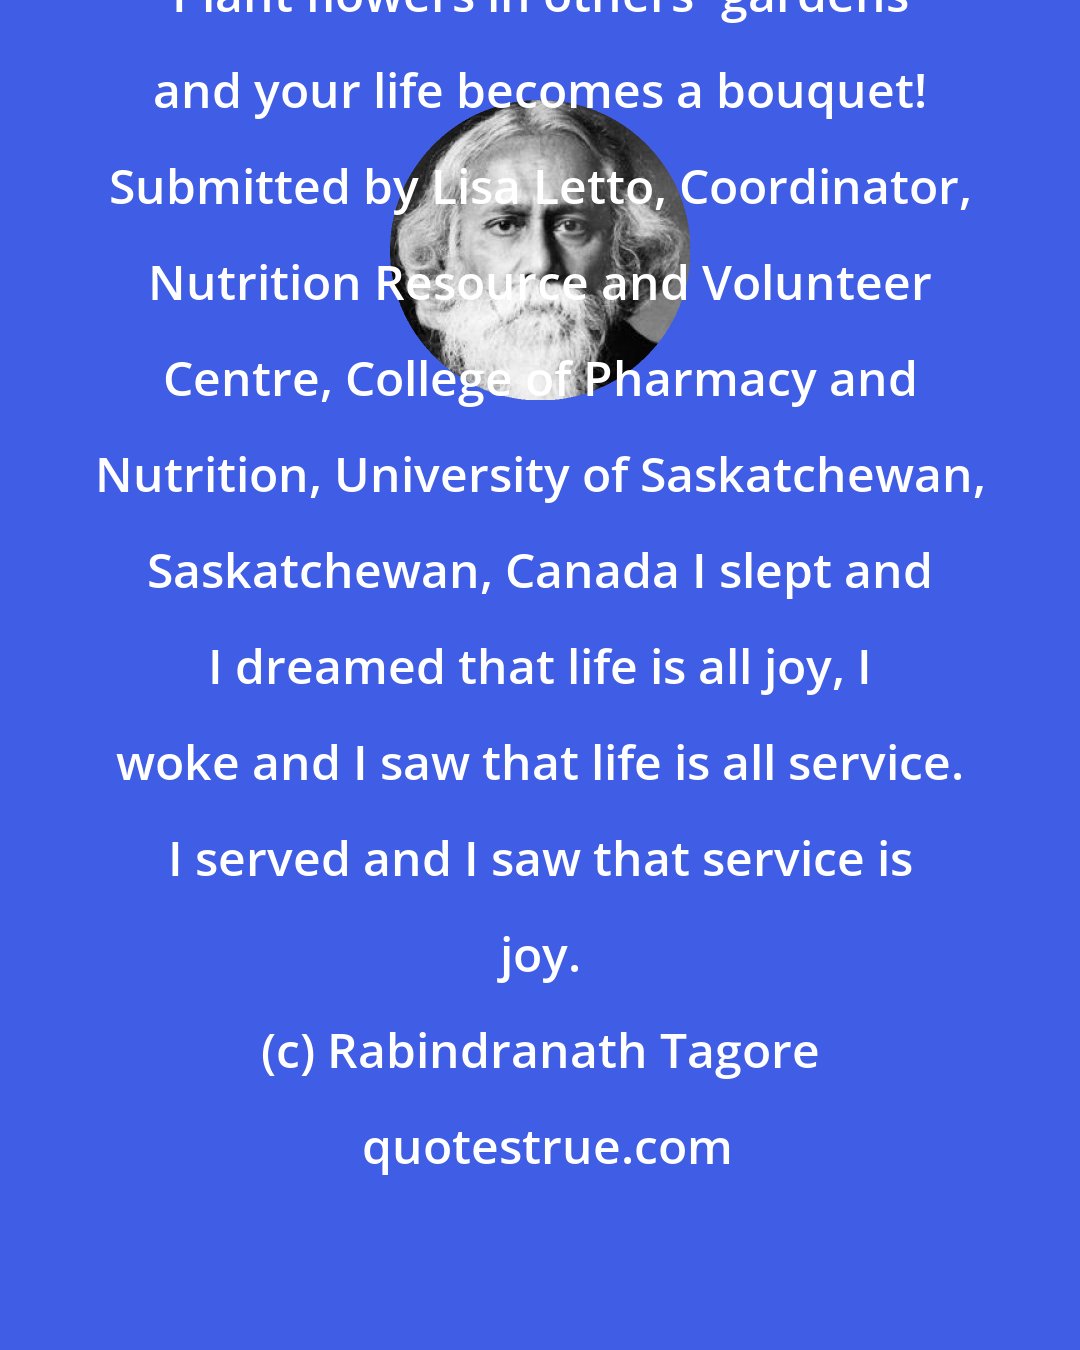 Rabindranath Tagore: Plant flowers in others' gardens and your life becomes a bouquet! Submitted by Lisa Letto, Coordinator, Nutrition Resource and Volunteer Centre, College of Pharmacy and Nutrition, University of Saskatchewan, Saskatchewan, Canada I slept and I dreamed that life is all joy, I woke and I saw that life is all service. I served and I saw that service is joy.